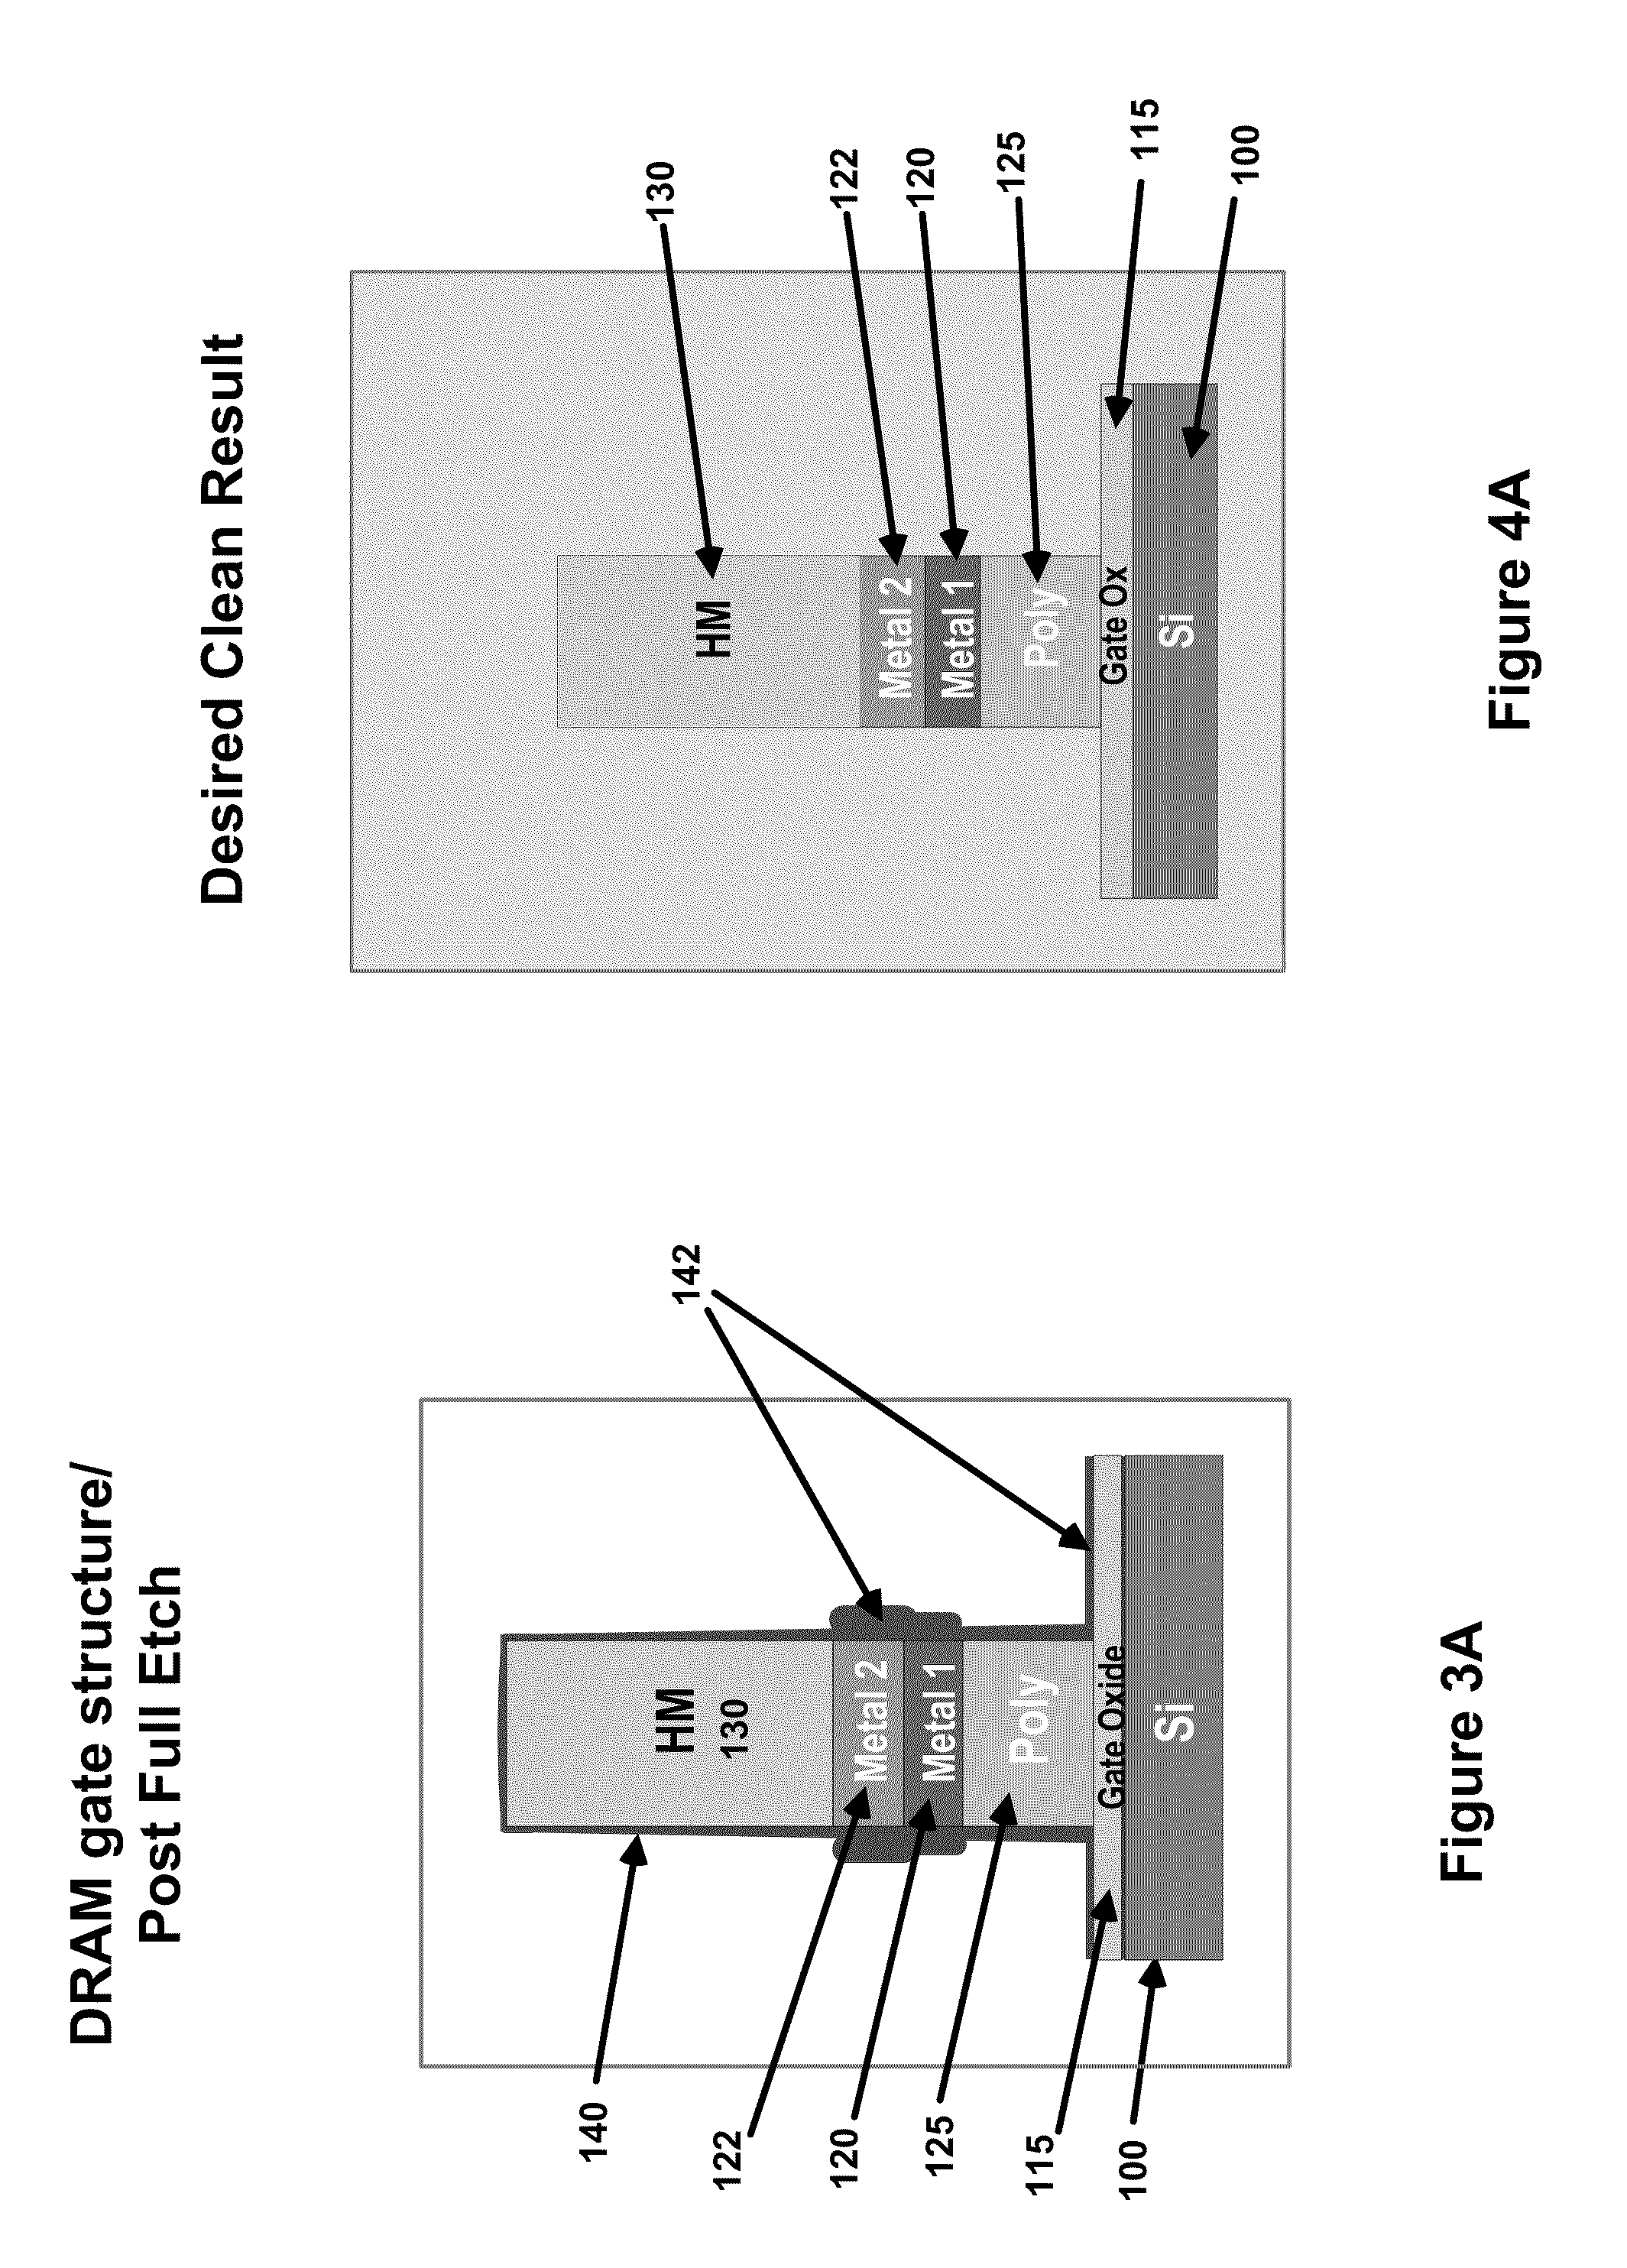 Method and apparatus for surface treatment of semiconductor substrates using sequential chemical applications